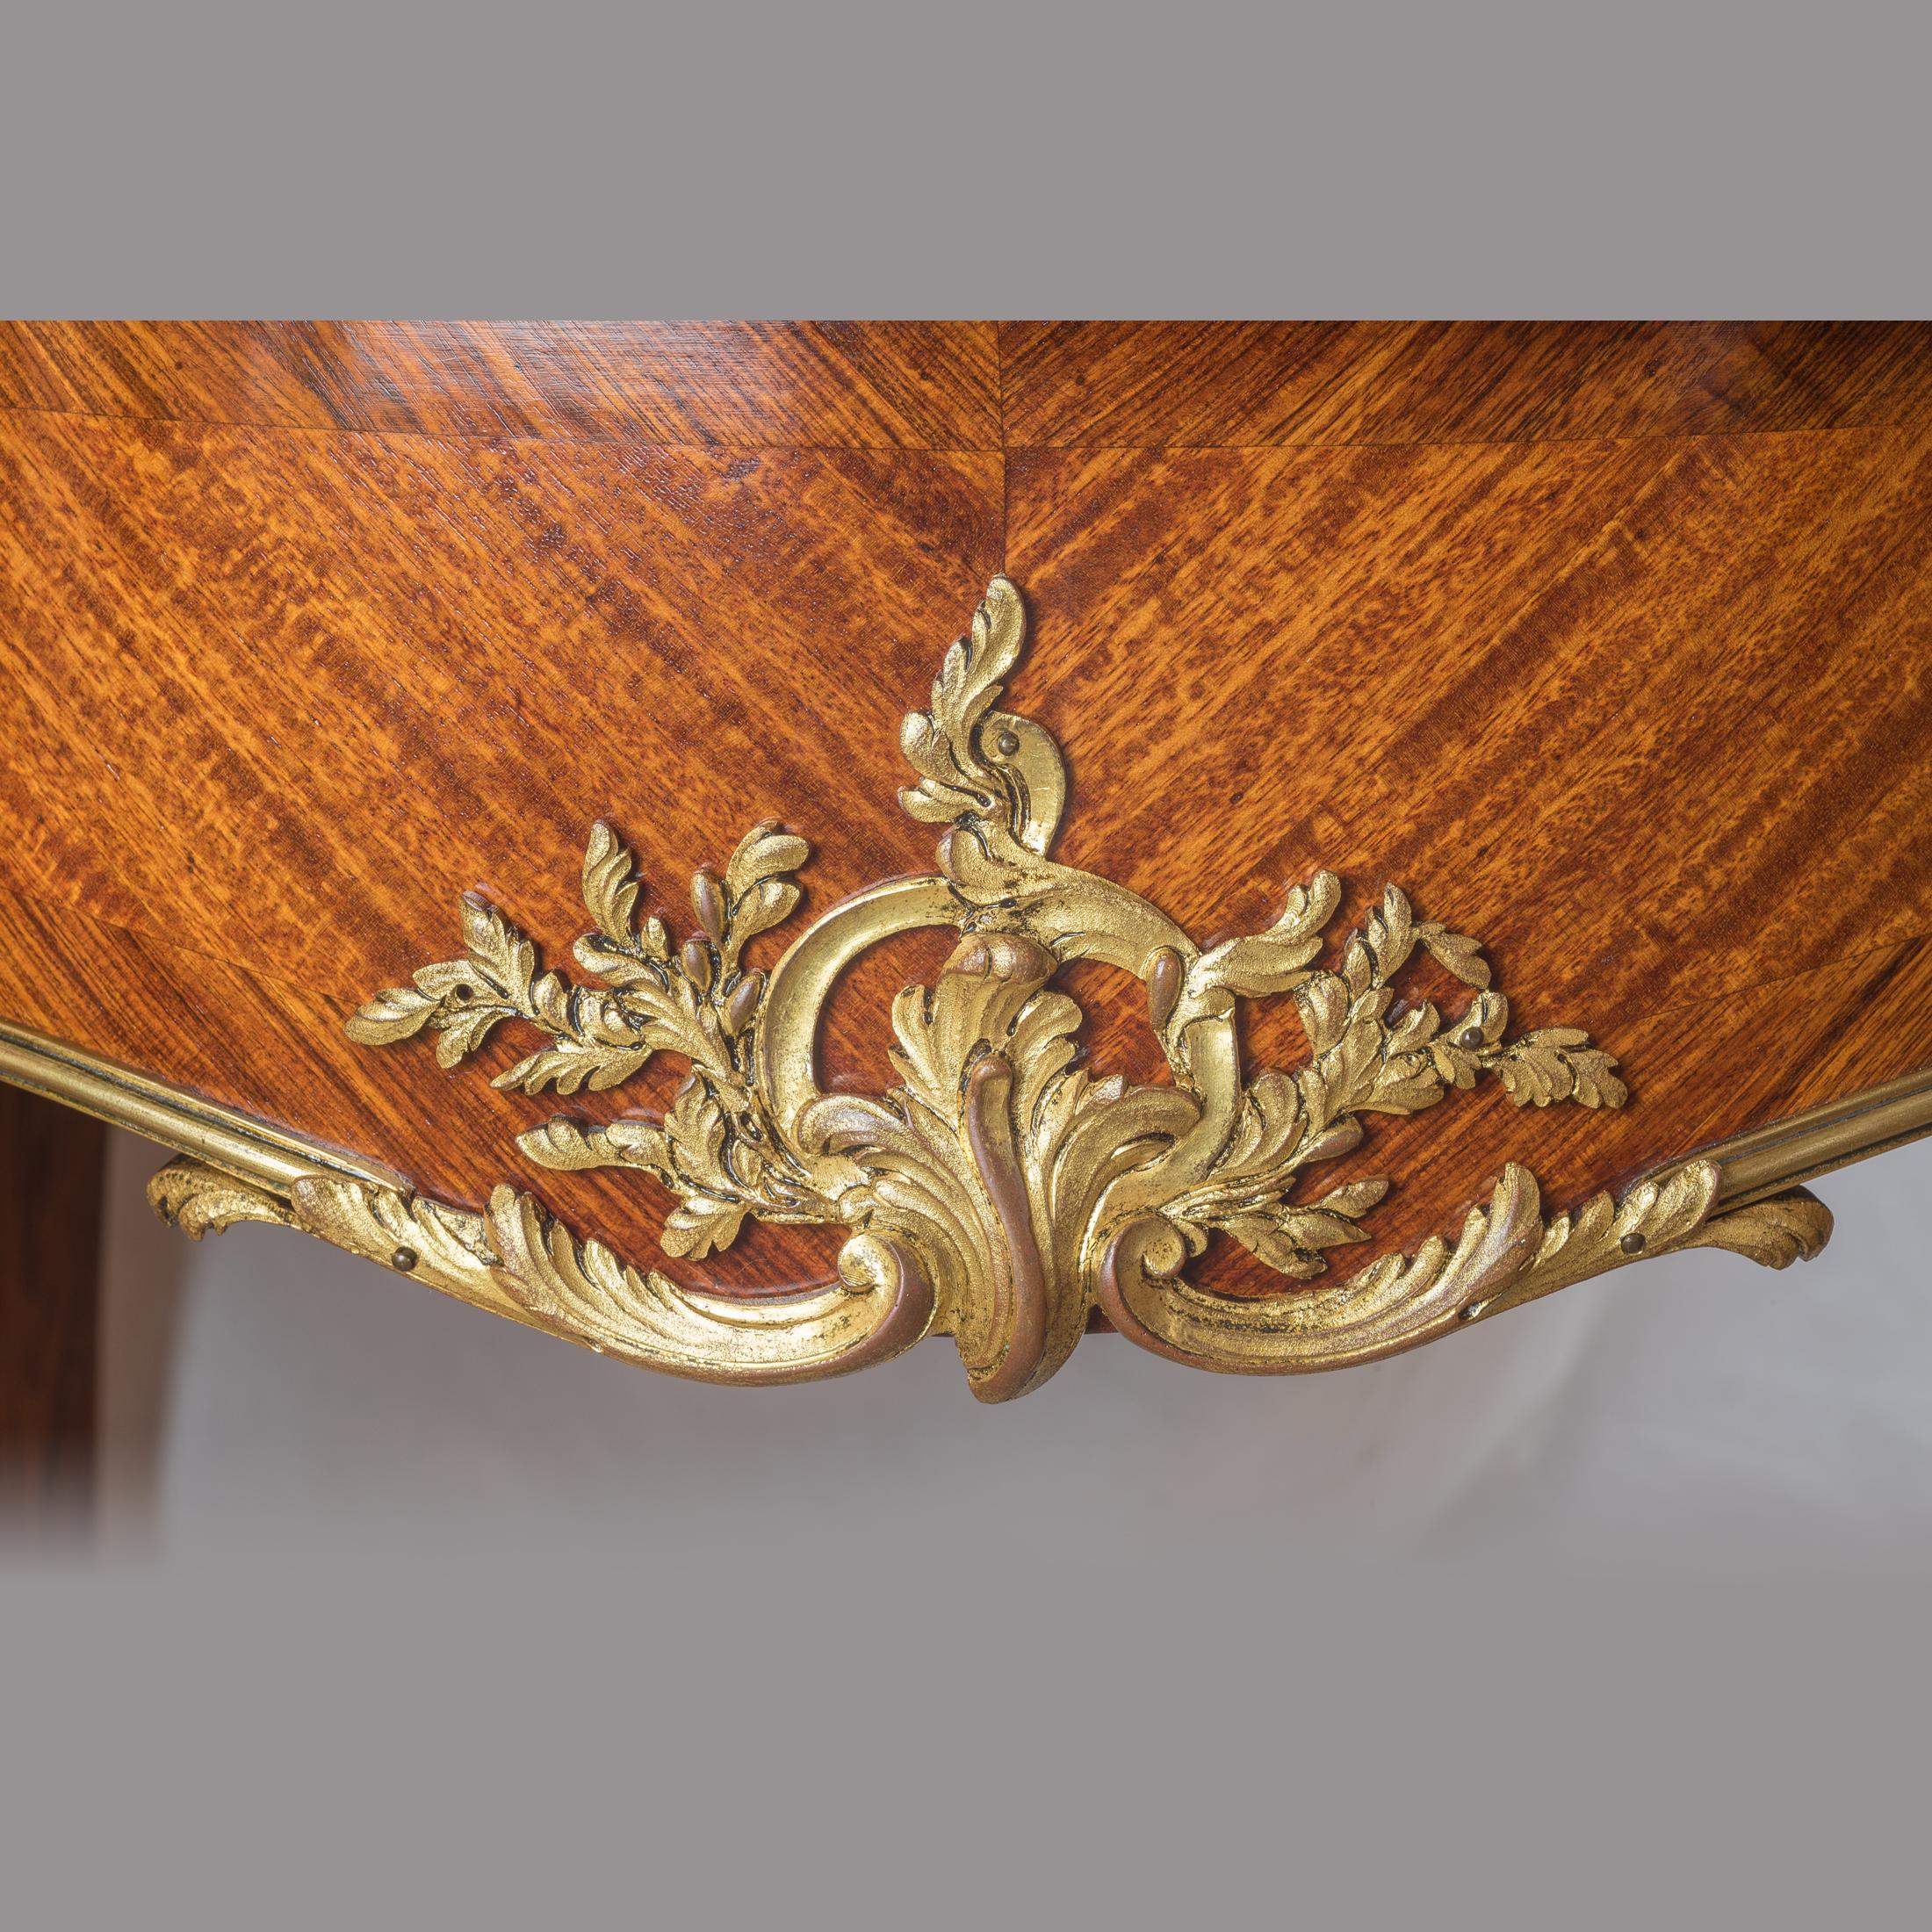 Gilt Louis XV-Style Ormolu-Mounted Marble-Top Center Table by Zwiener For Sale